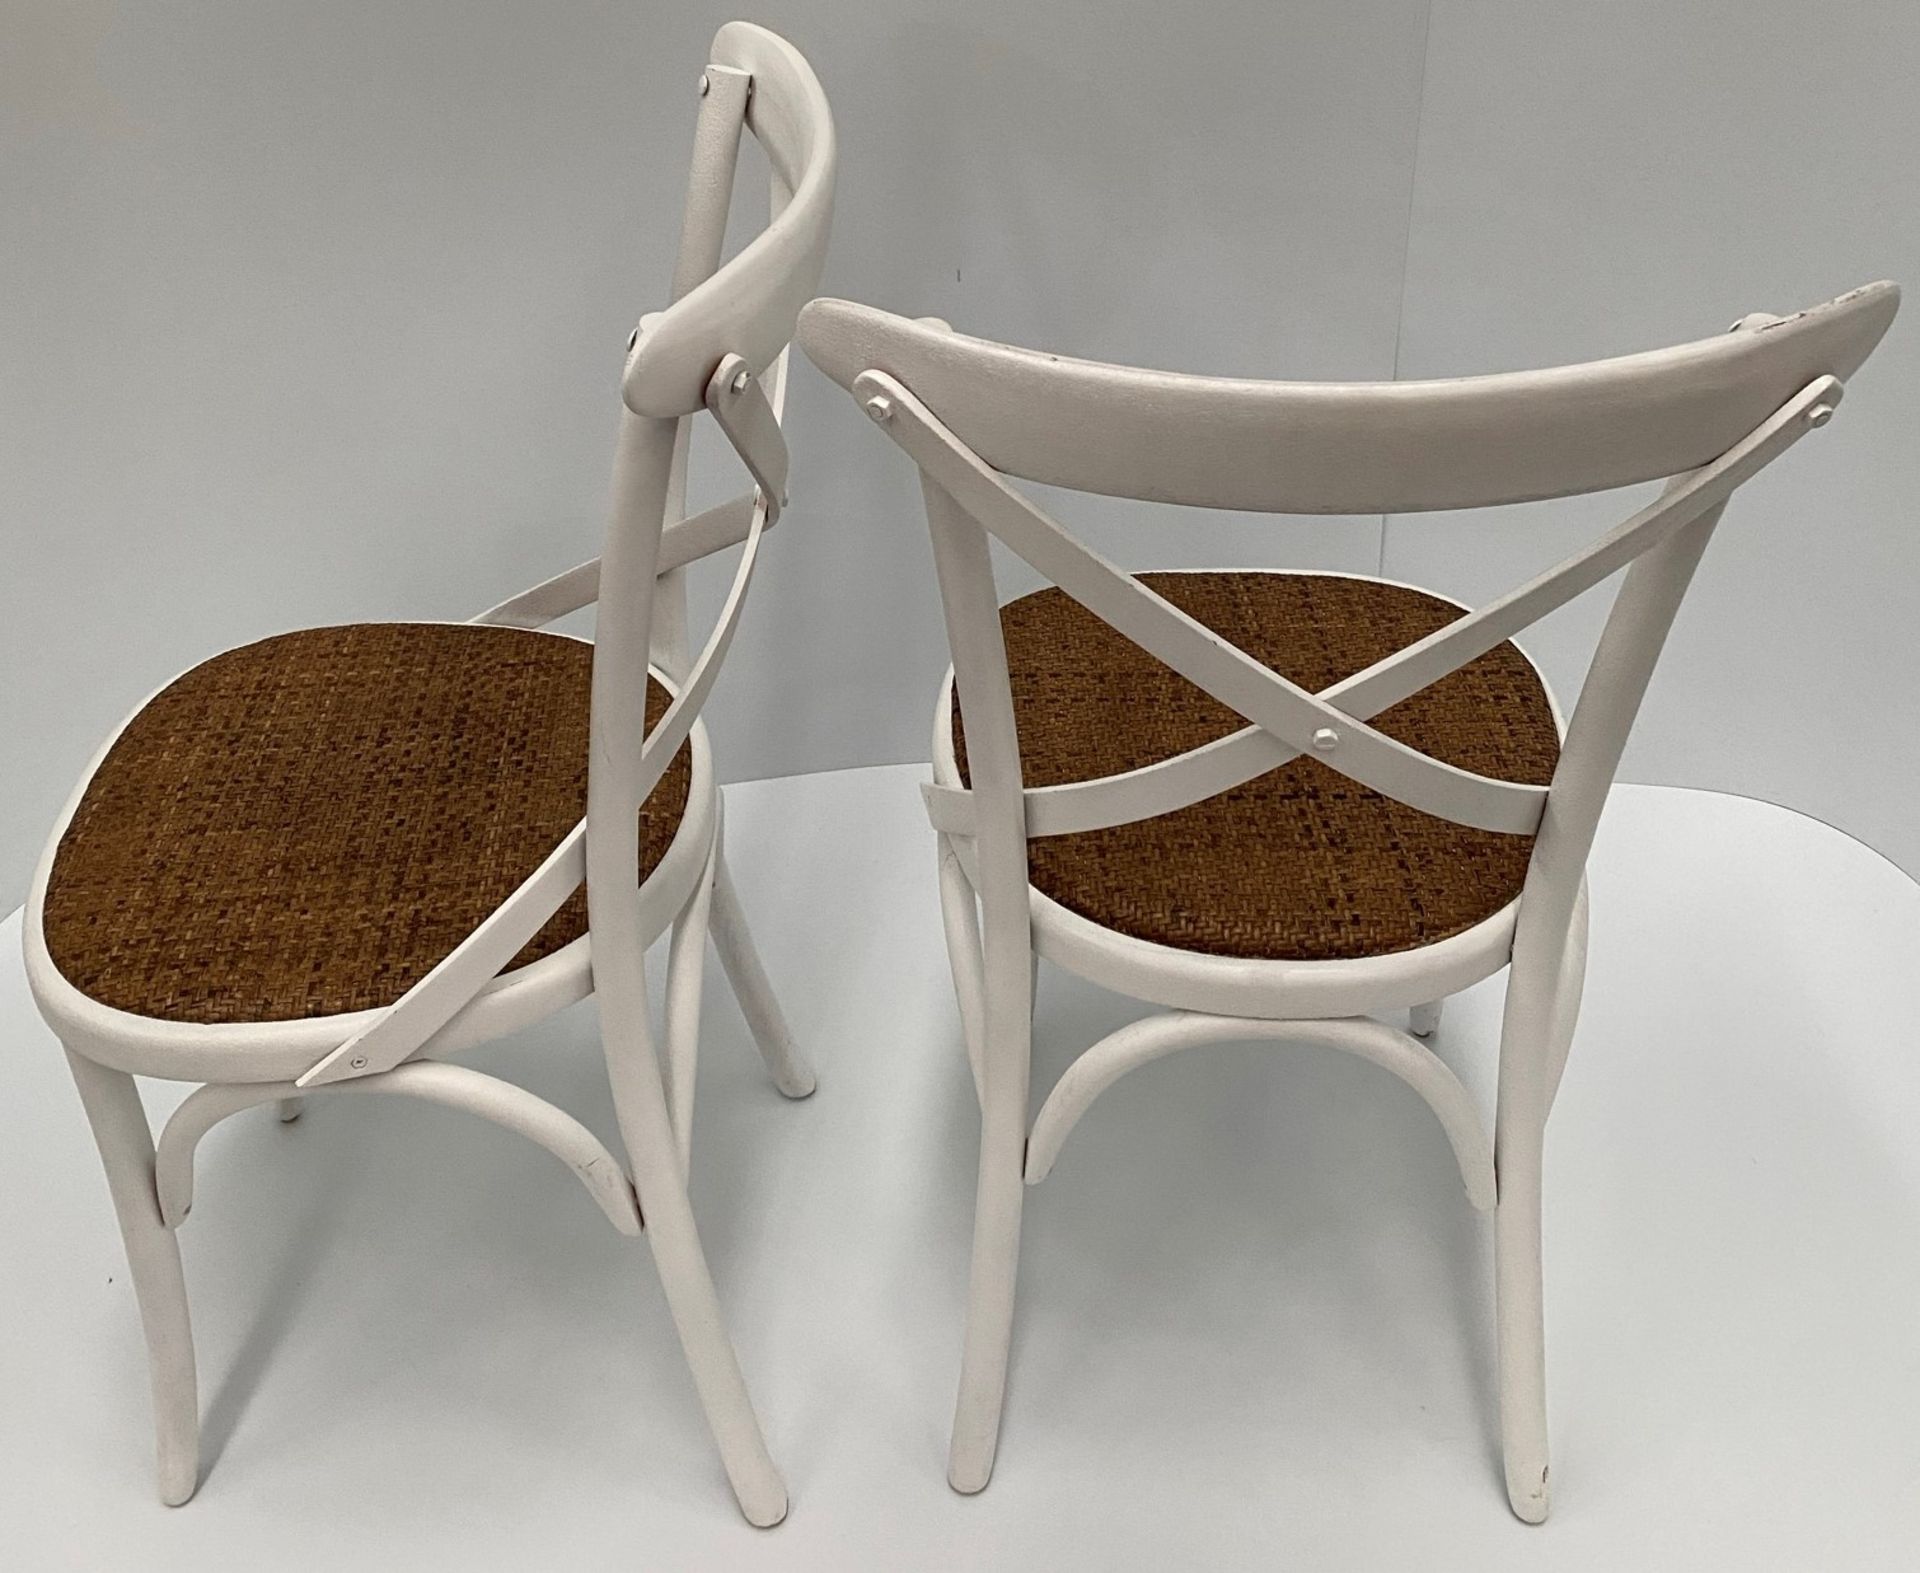 2 x White Palm chairs with hessian seats. - Image 2 of 4